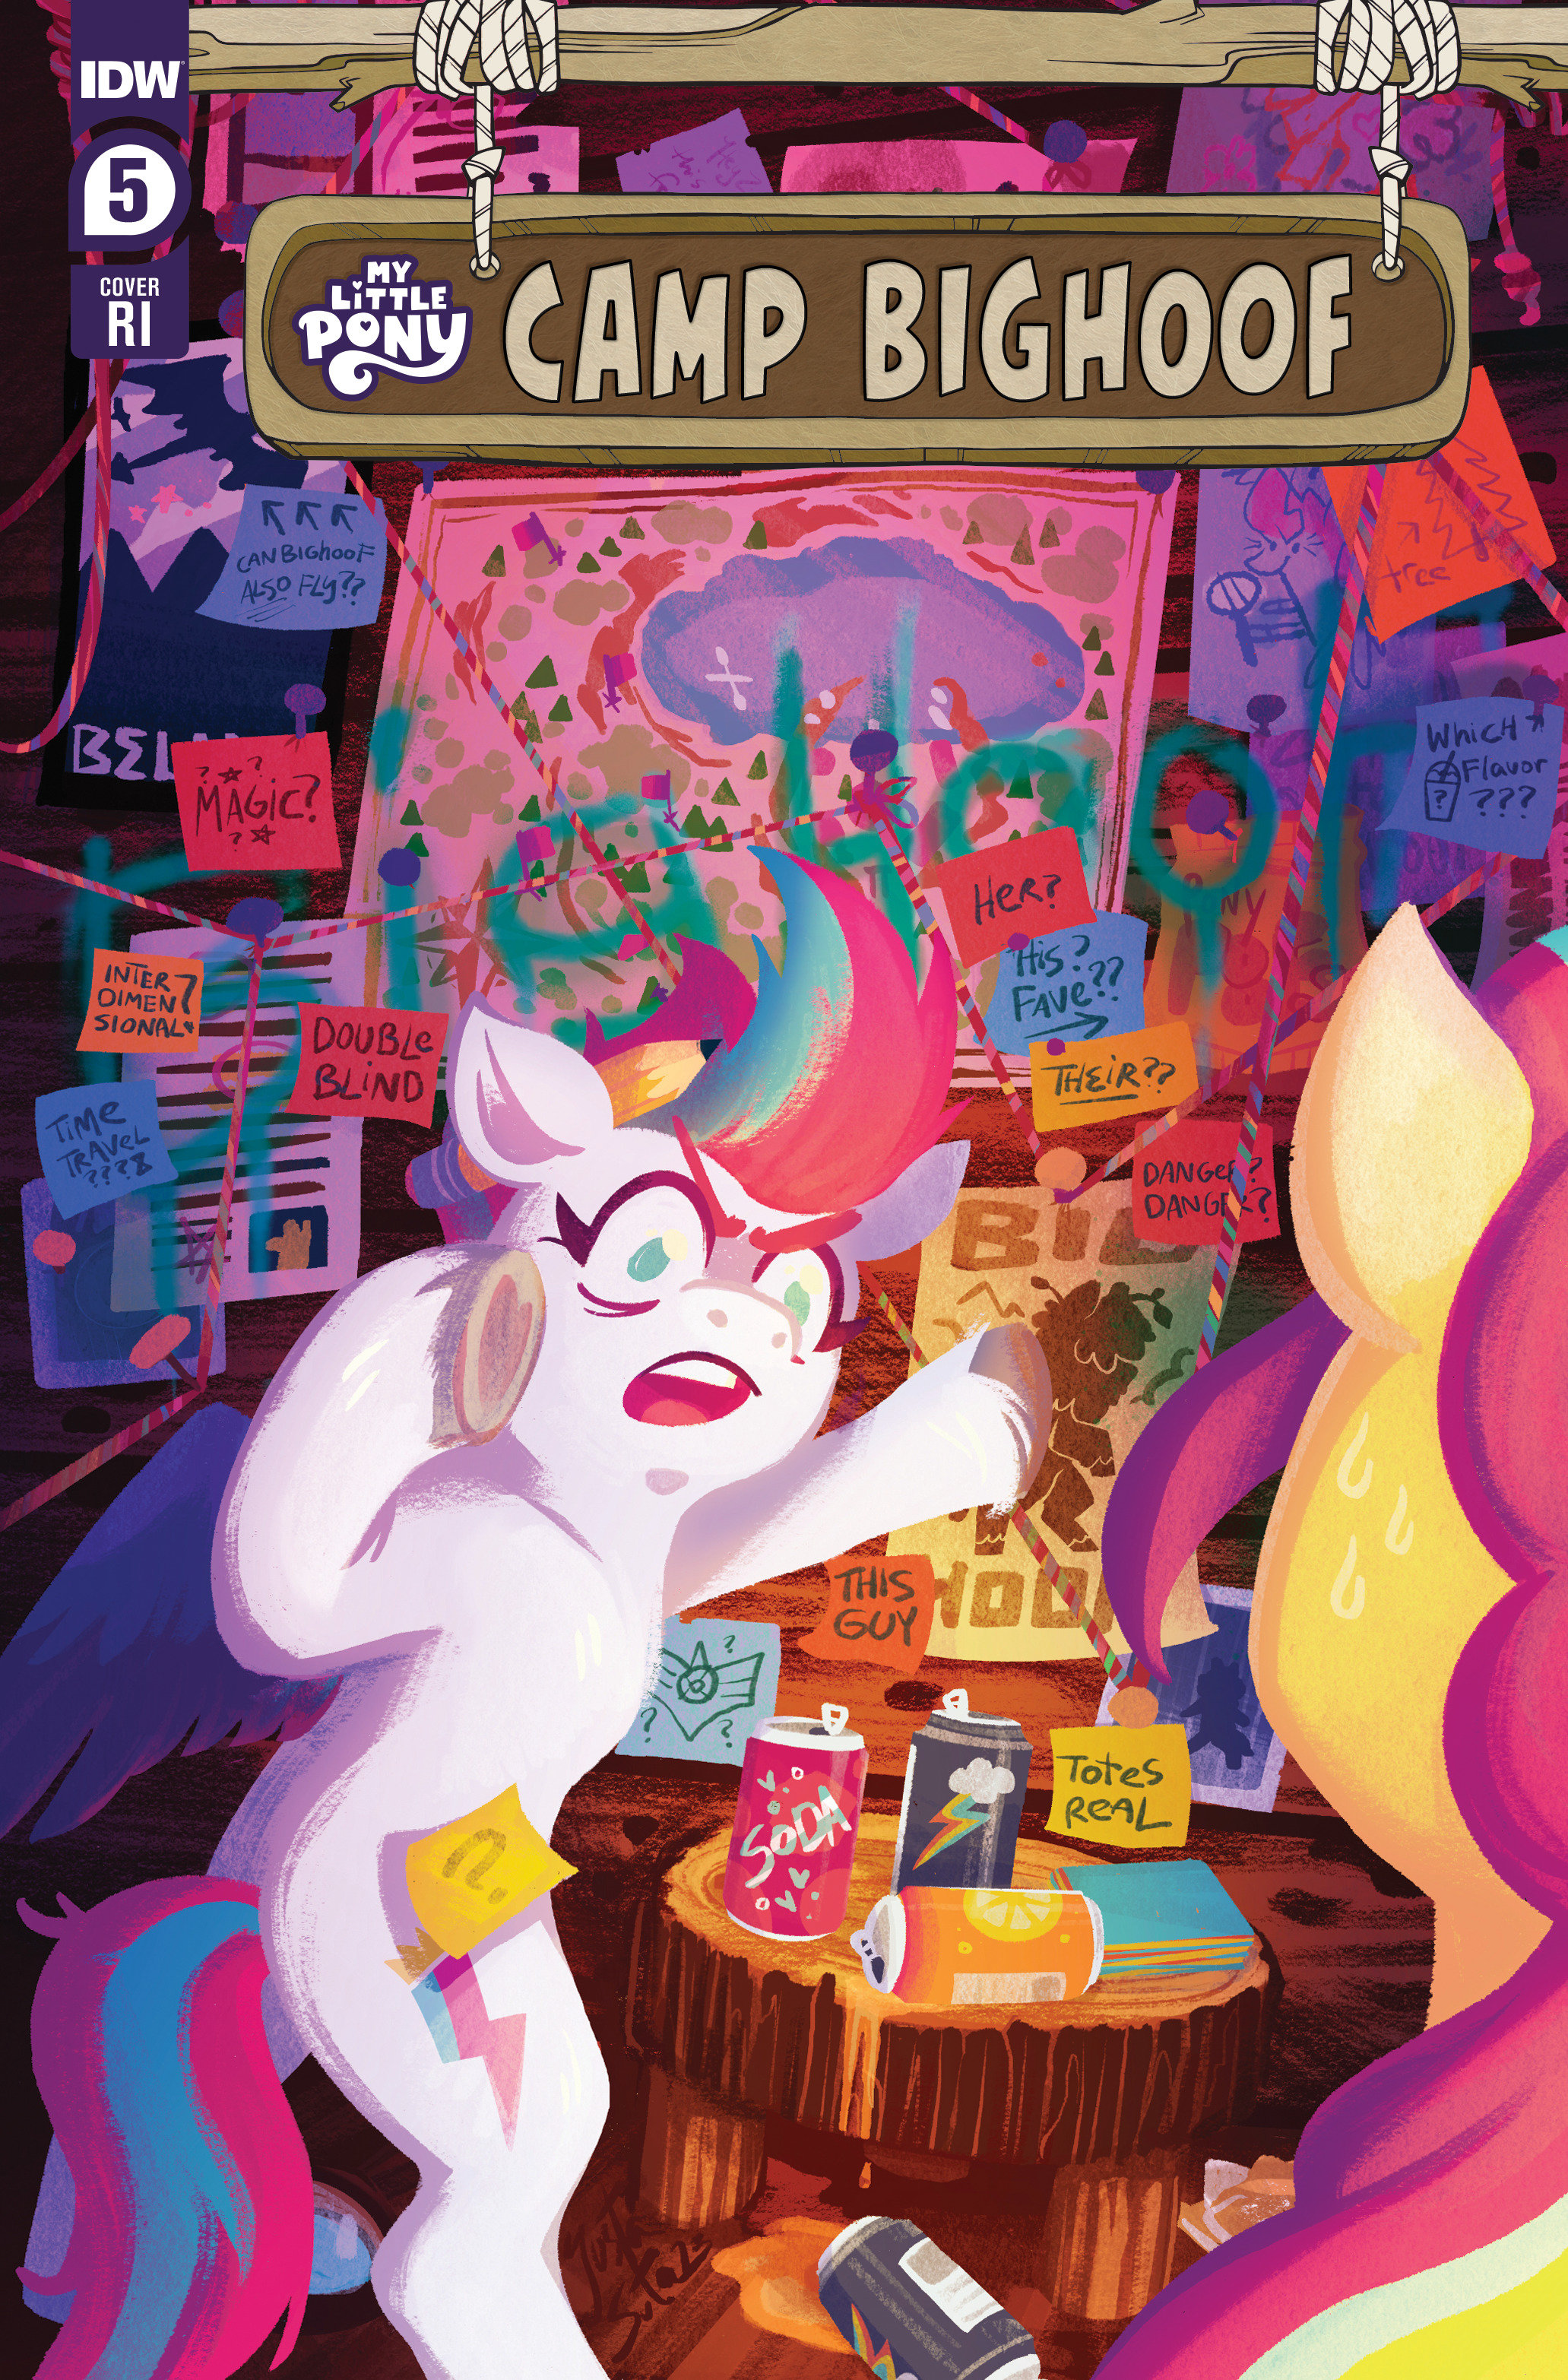 My Little Pony Camp Bighoof #5 Cover Justasuta 1 for 25 Incentive